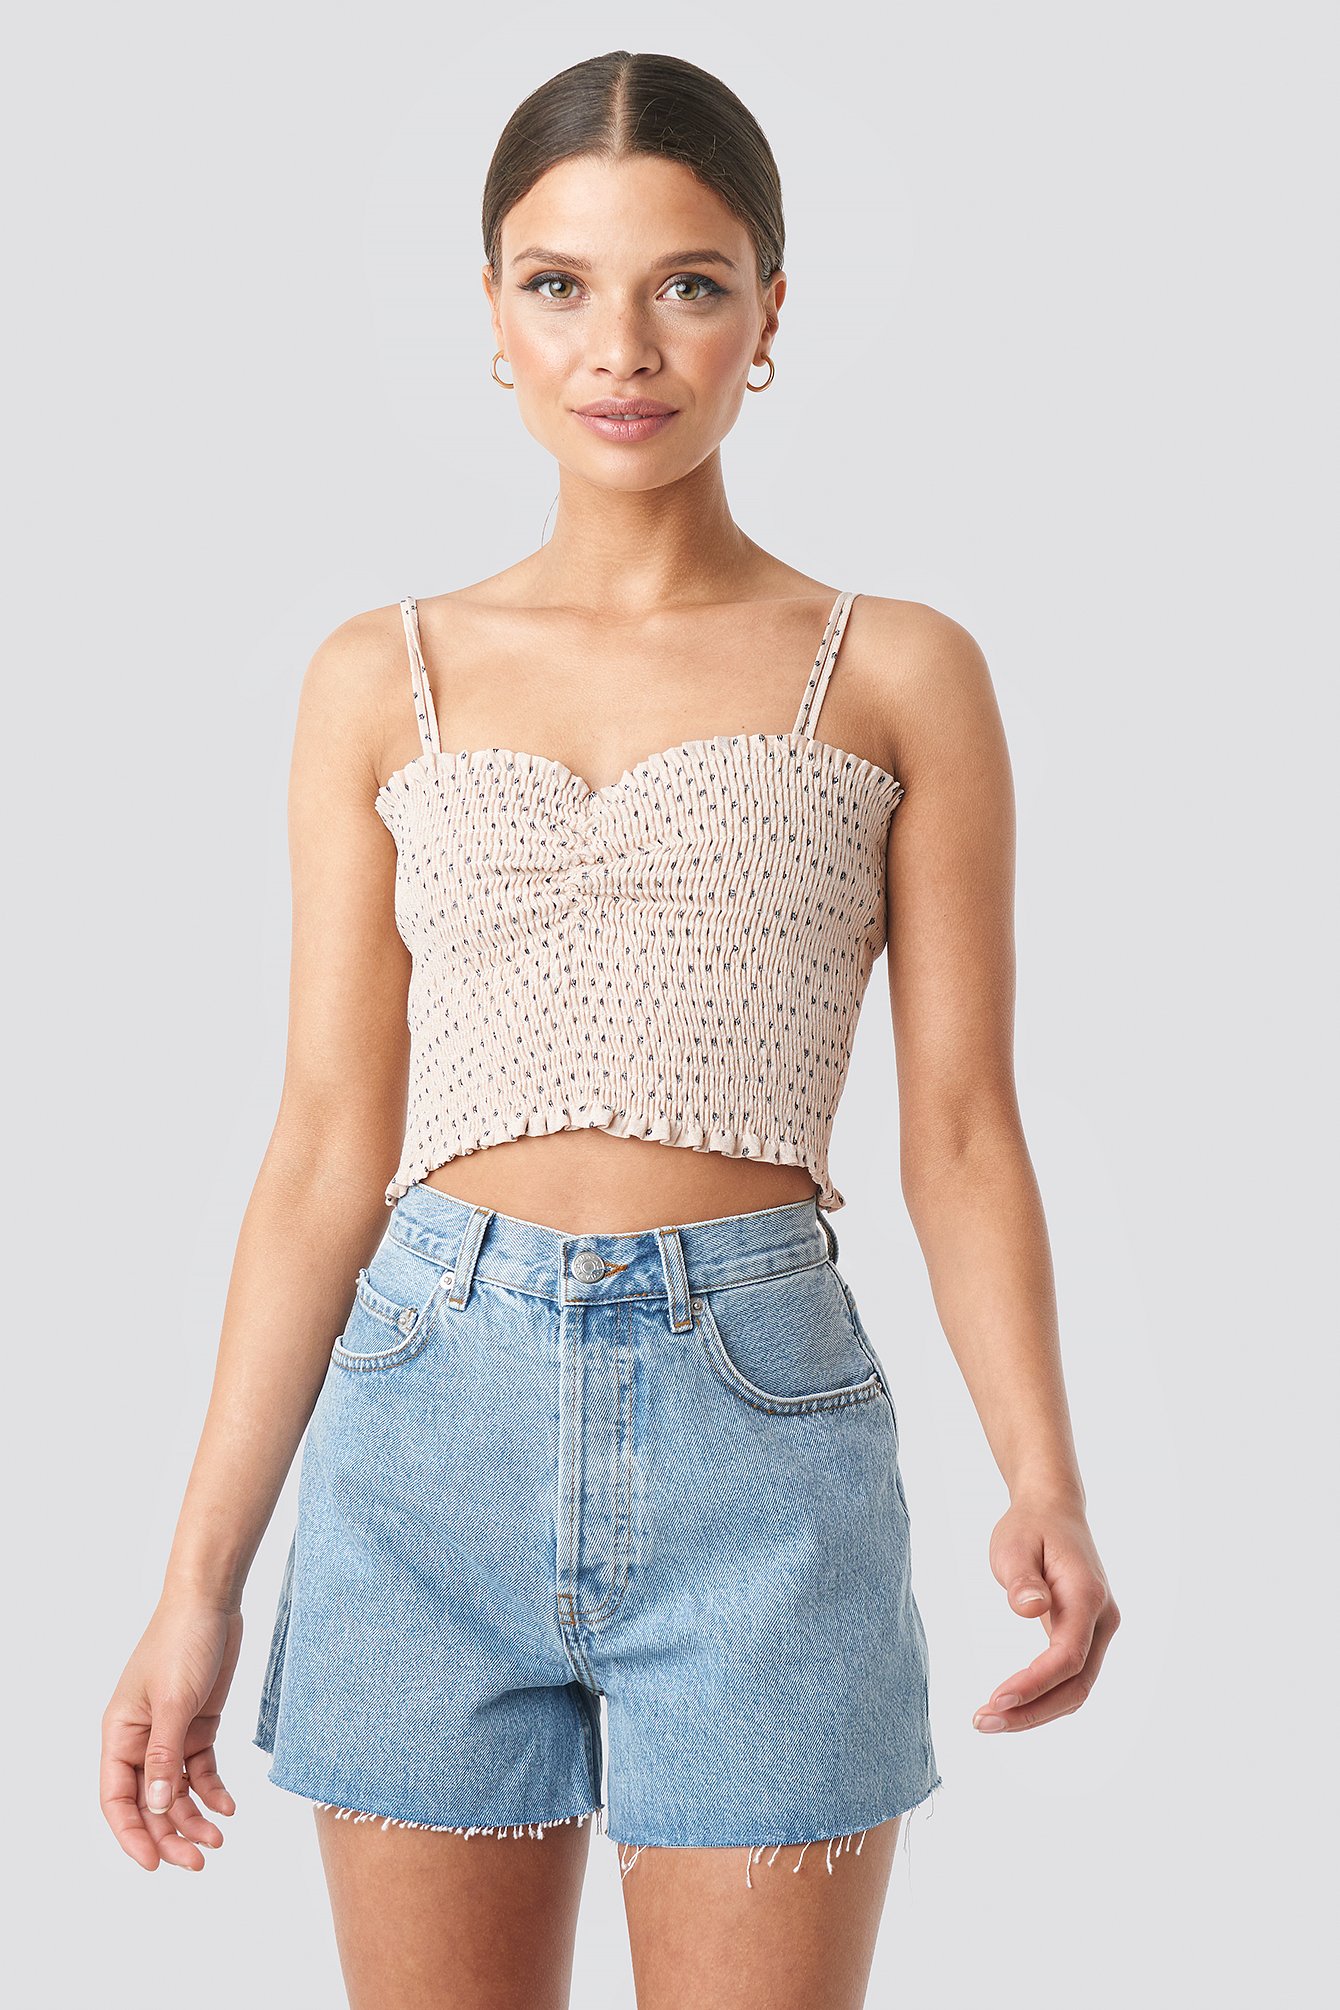 where to buy high waisted shorts